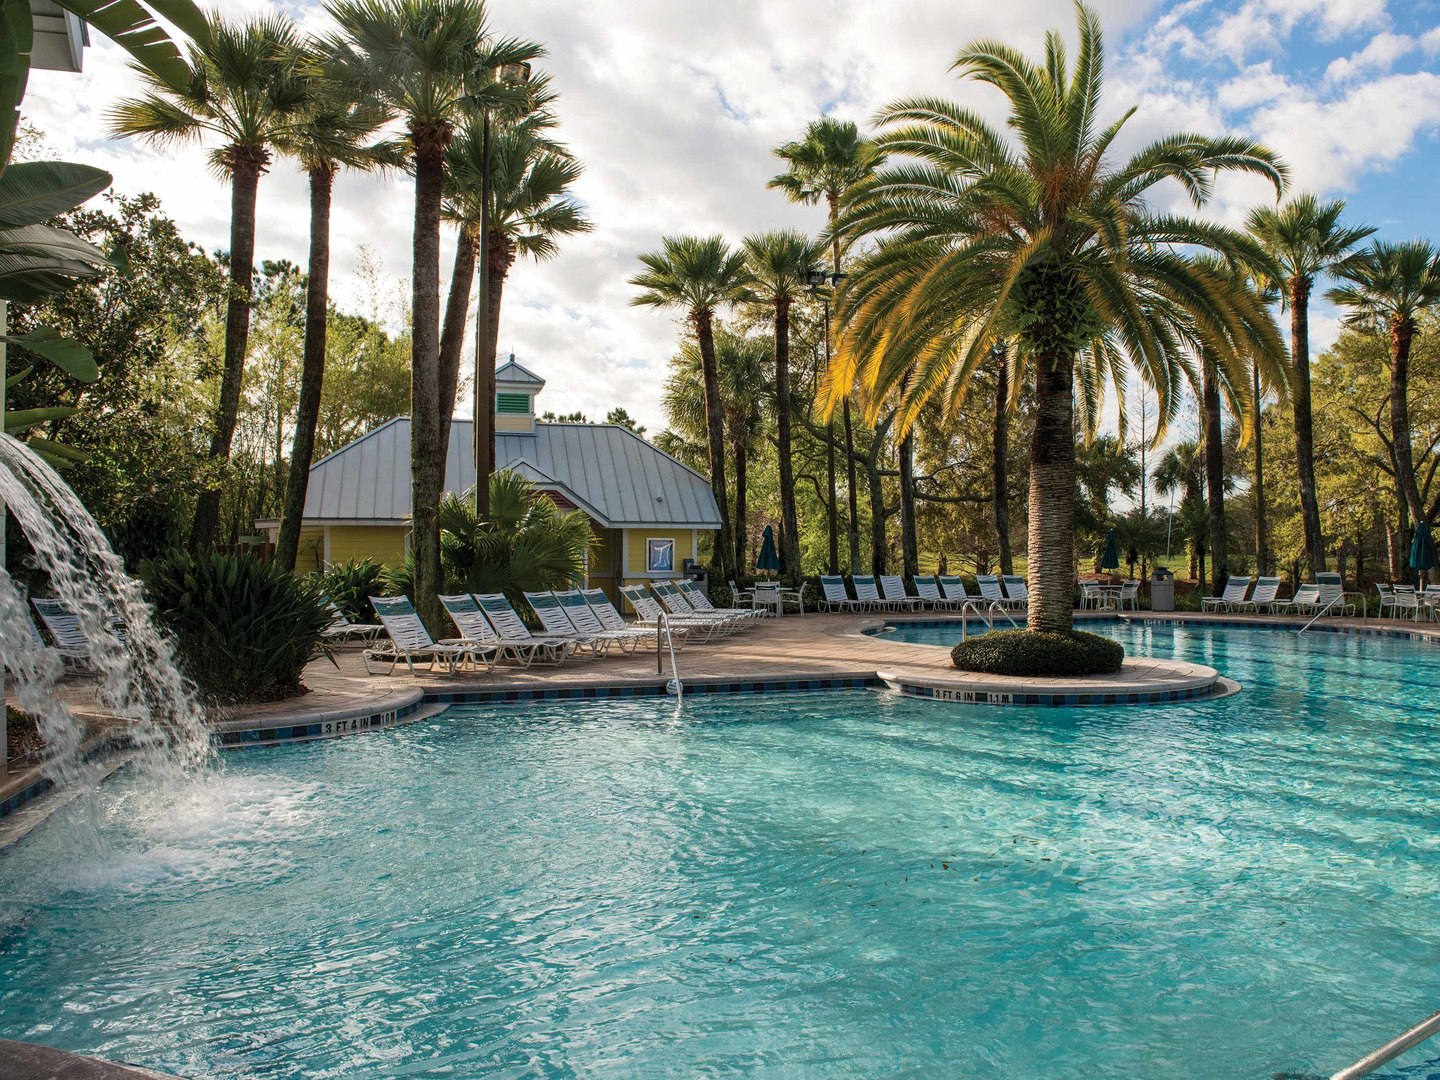 Marriott's Cypress Harbour Pool. Marriott's Cypress Harbour is located in Orlando, Florida United States.